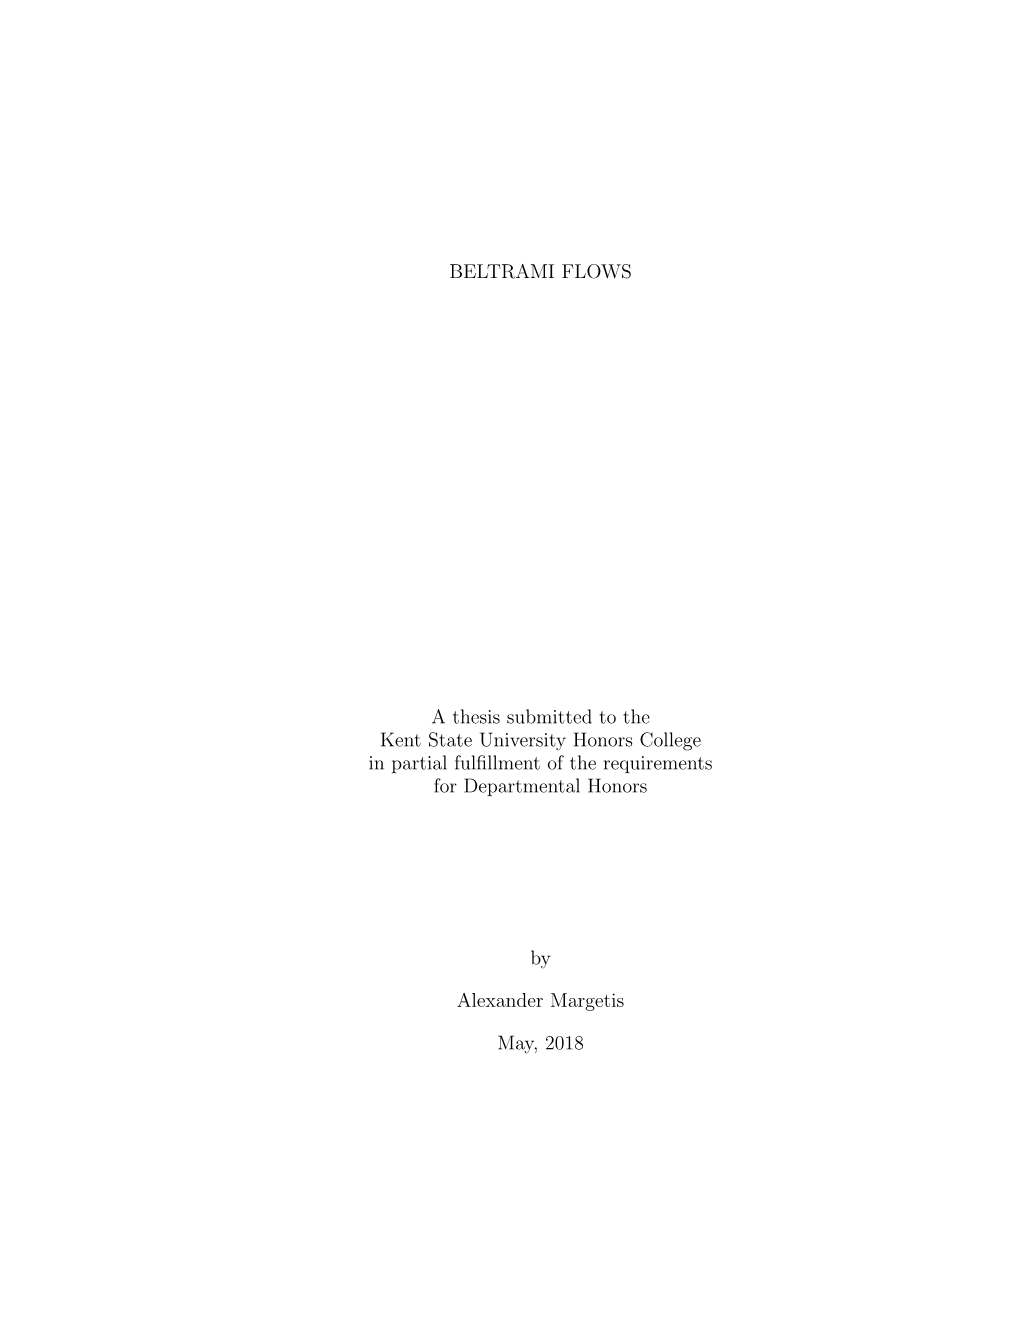 BELTRAMI FLOWS a Thesis Submitted to the Kent State University Honors